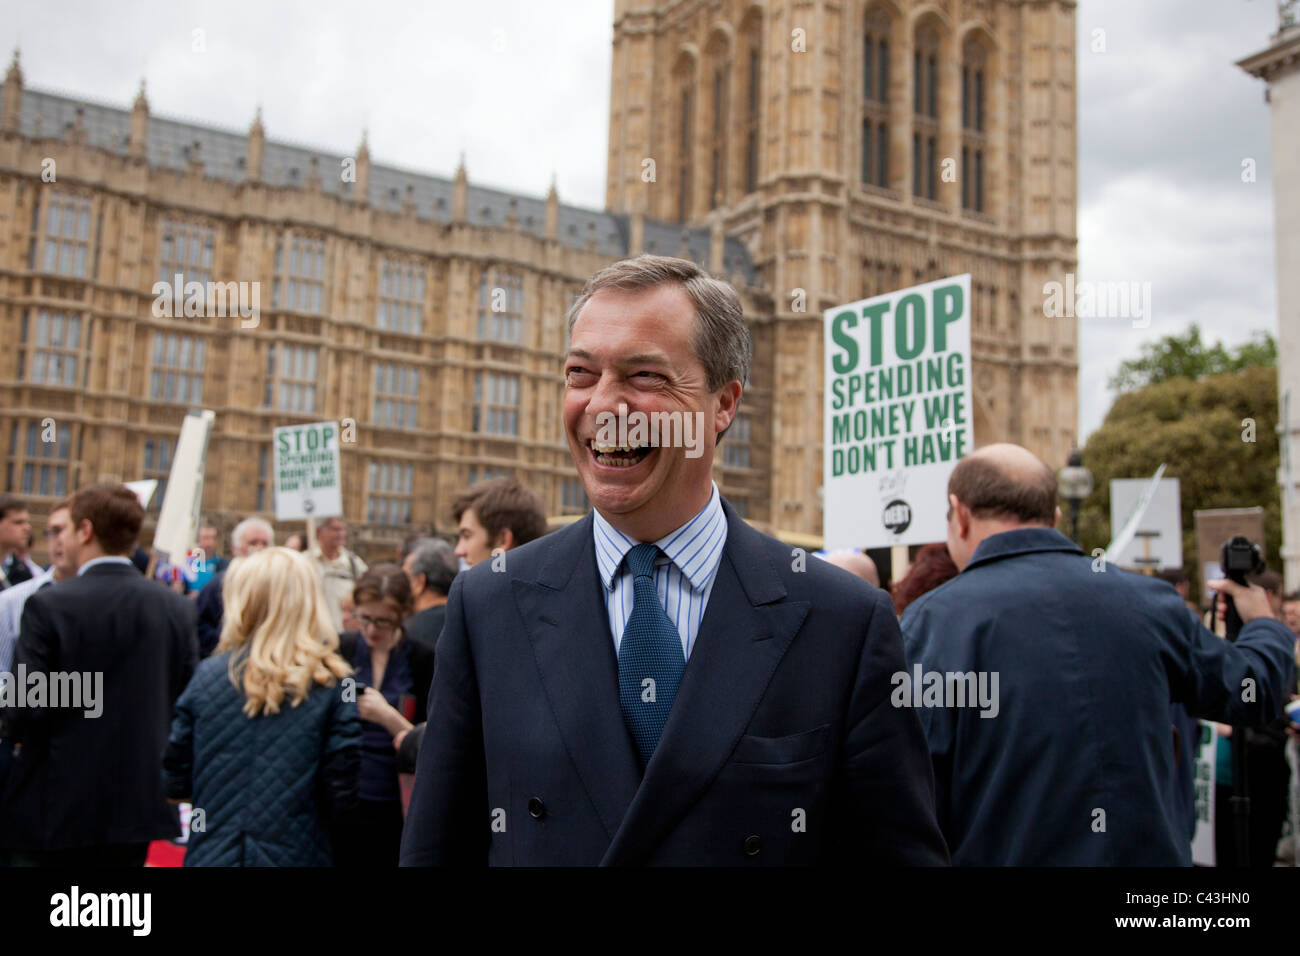 UKIP leader Nigel Farage smiles outside Parliament during a pro-cuts protest in support of government fiscal cutbacks. Stock Photo